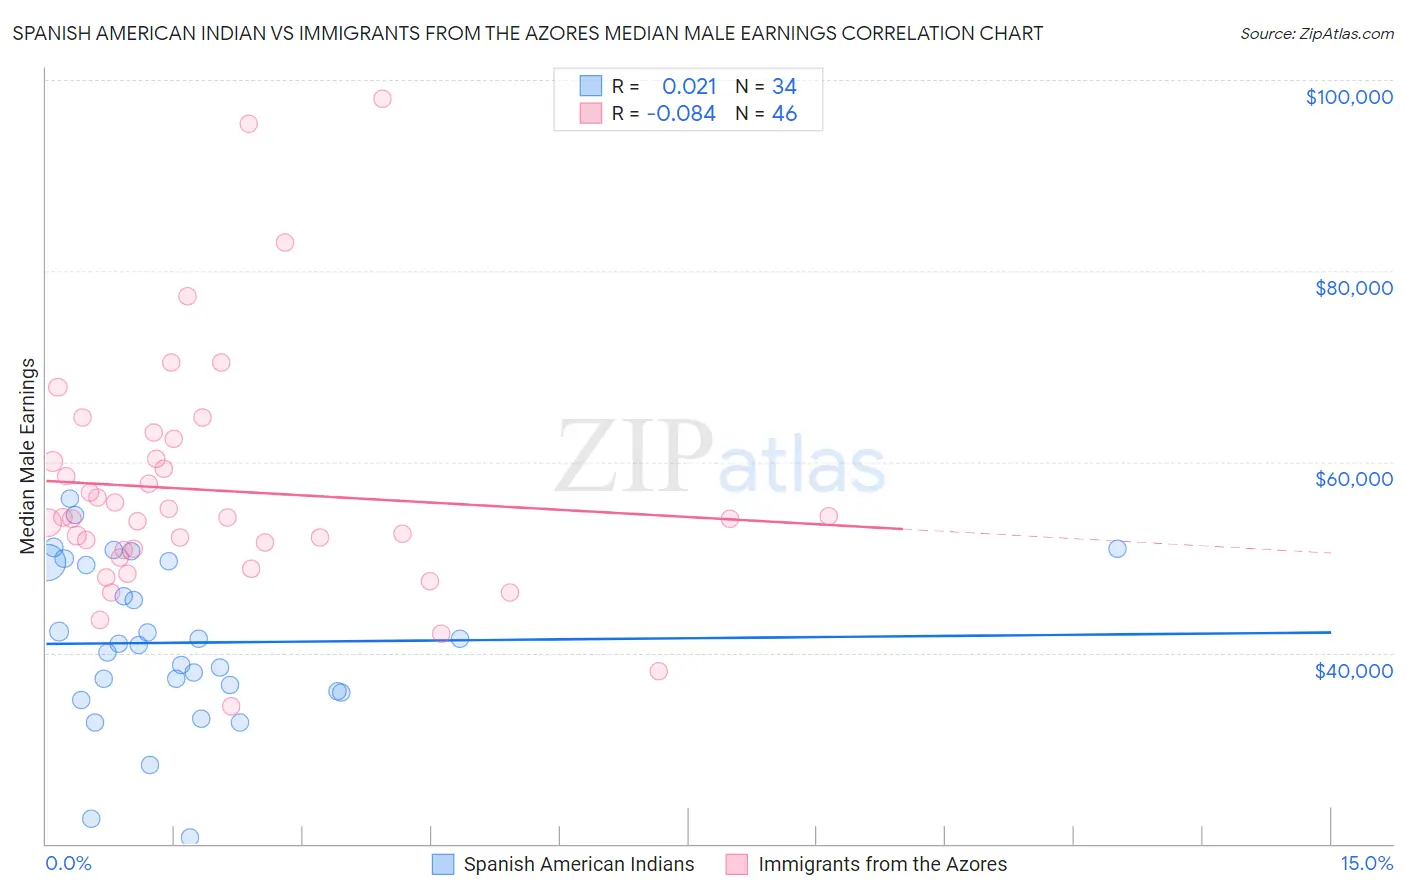 Spanish American Indian vs Immigrants from the Azores Median Male Earnings